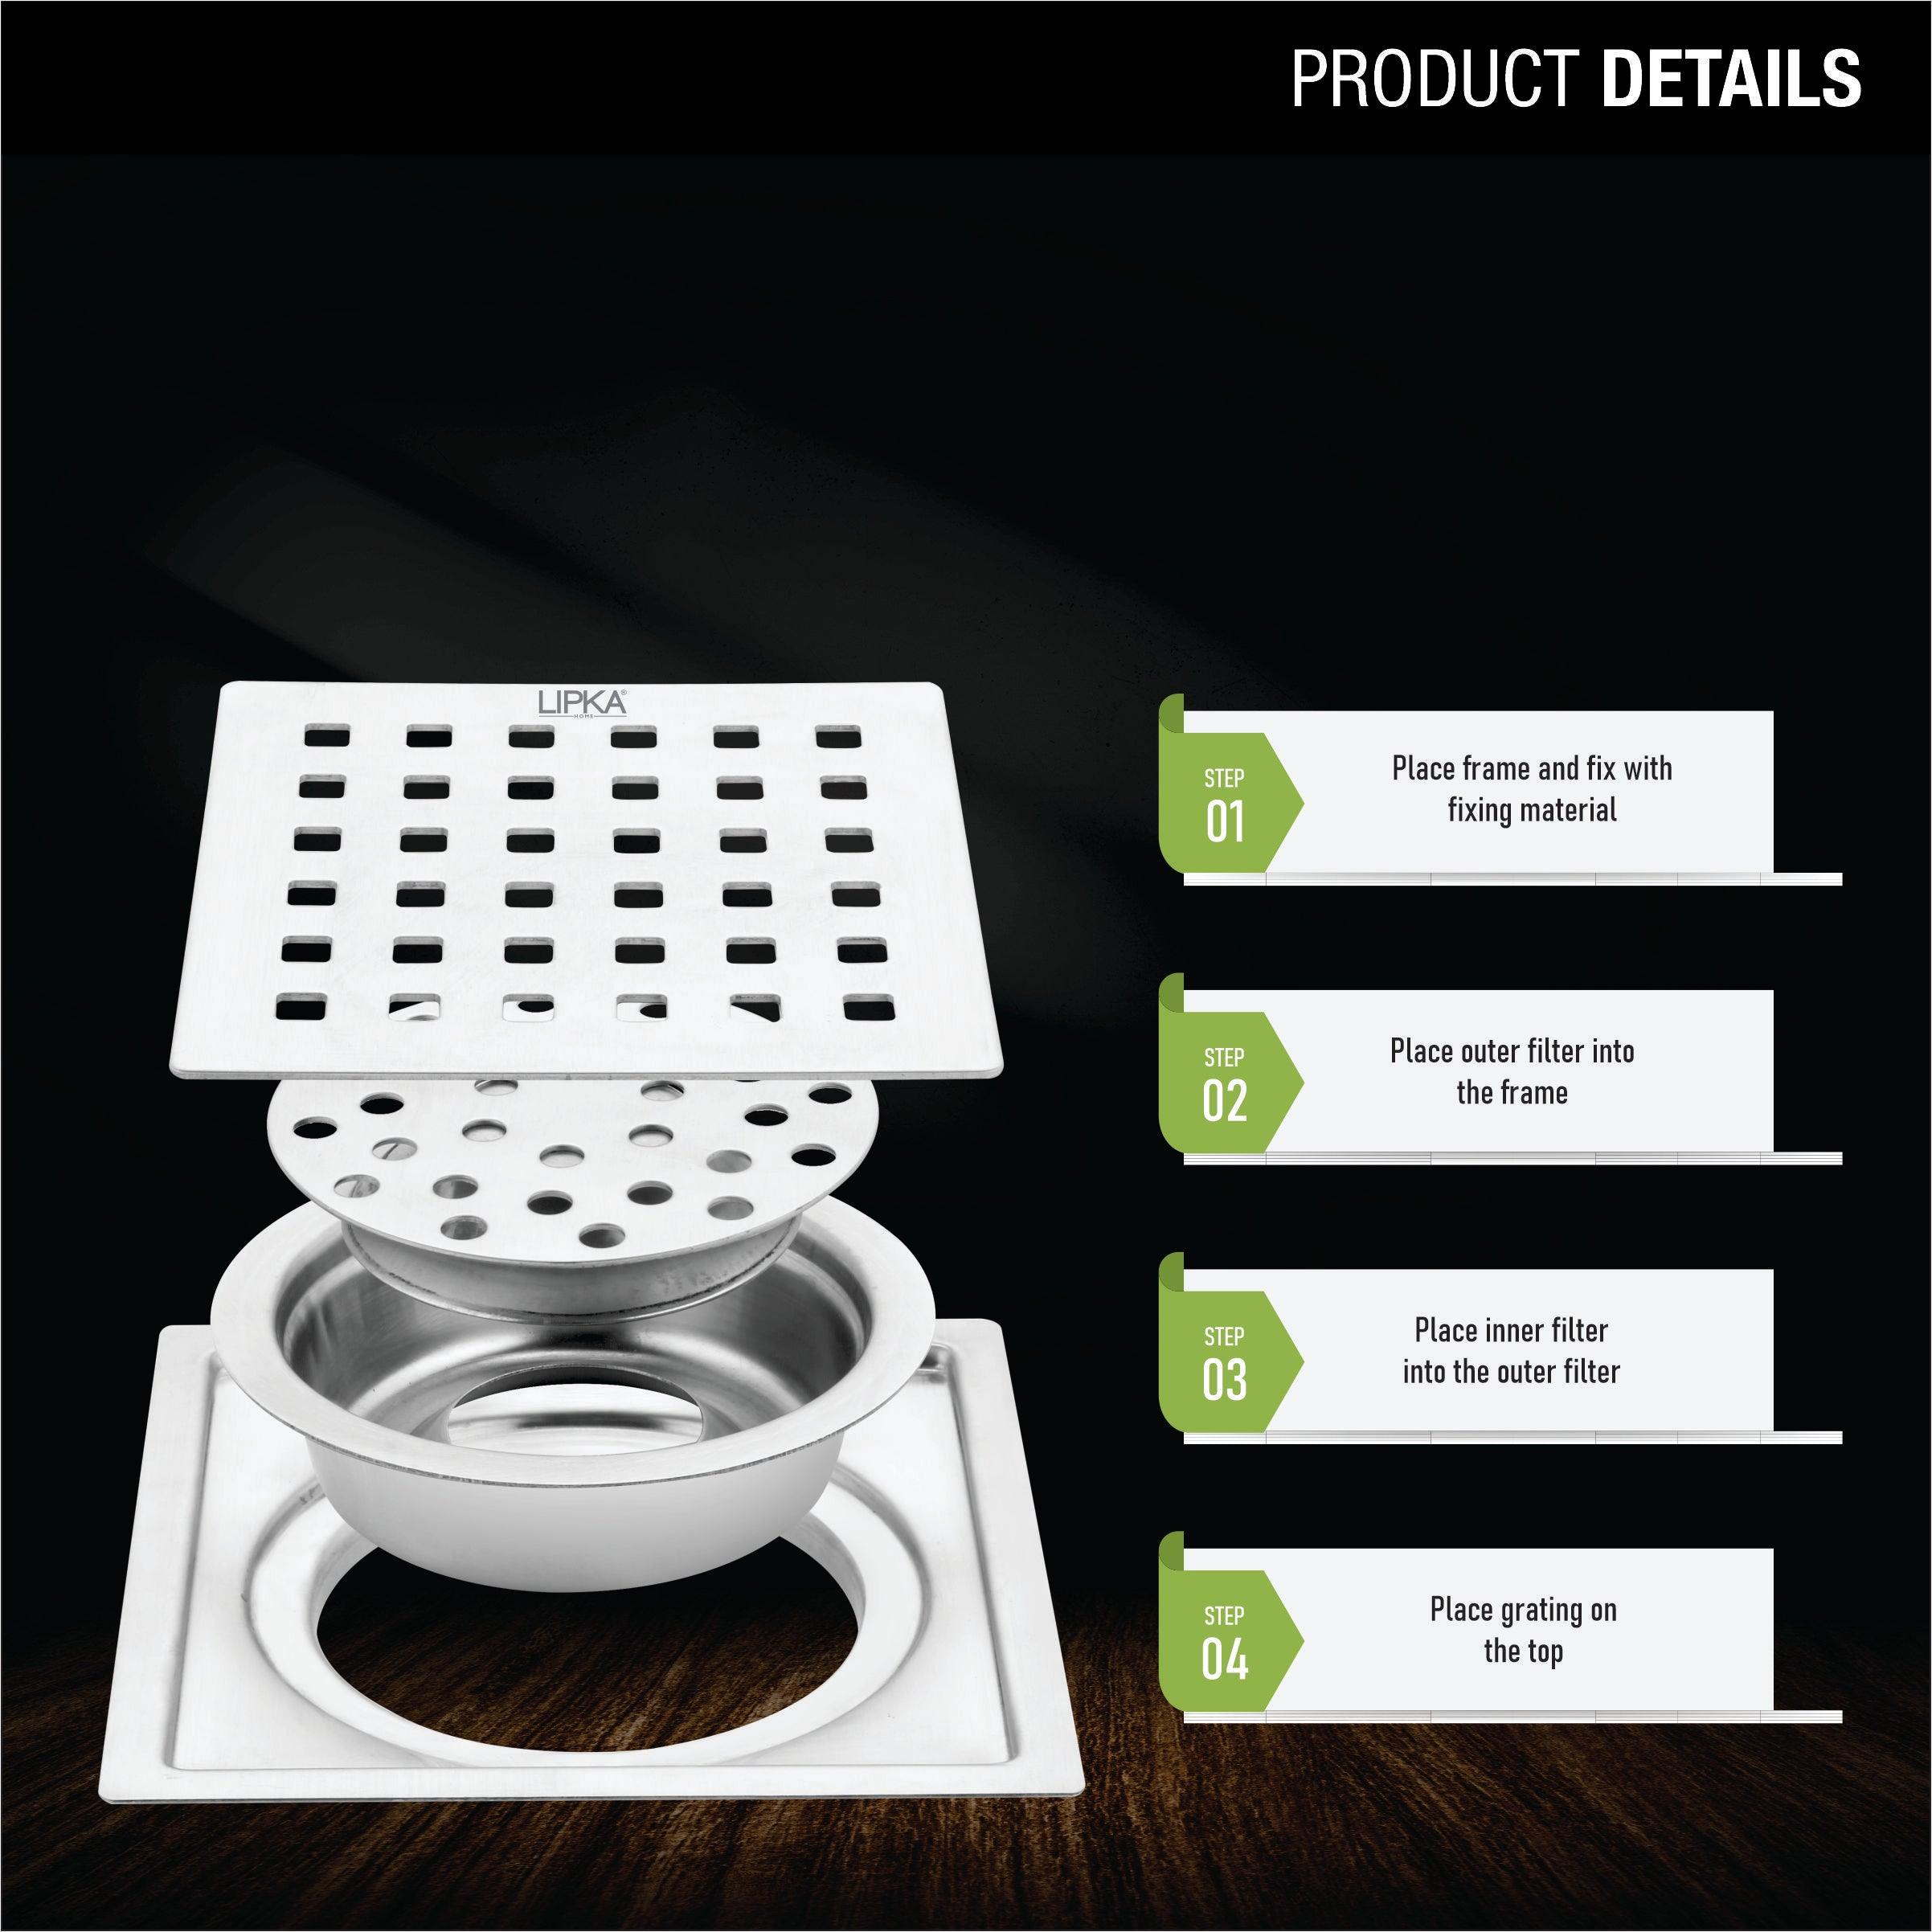 Red Exclusive Square Flat Cut Floor Drain (5 x 5 Inches) with Cockroach Trap product details